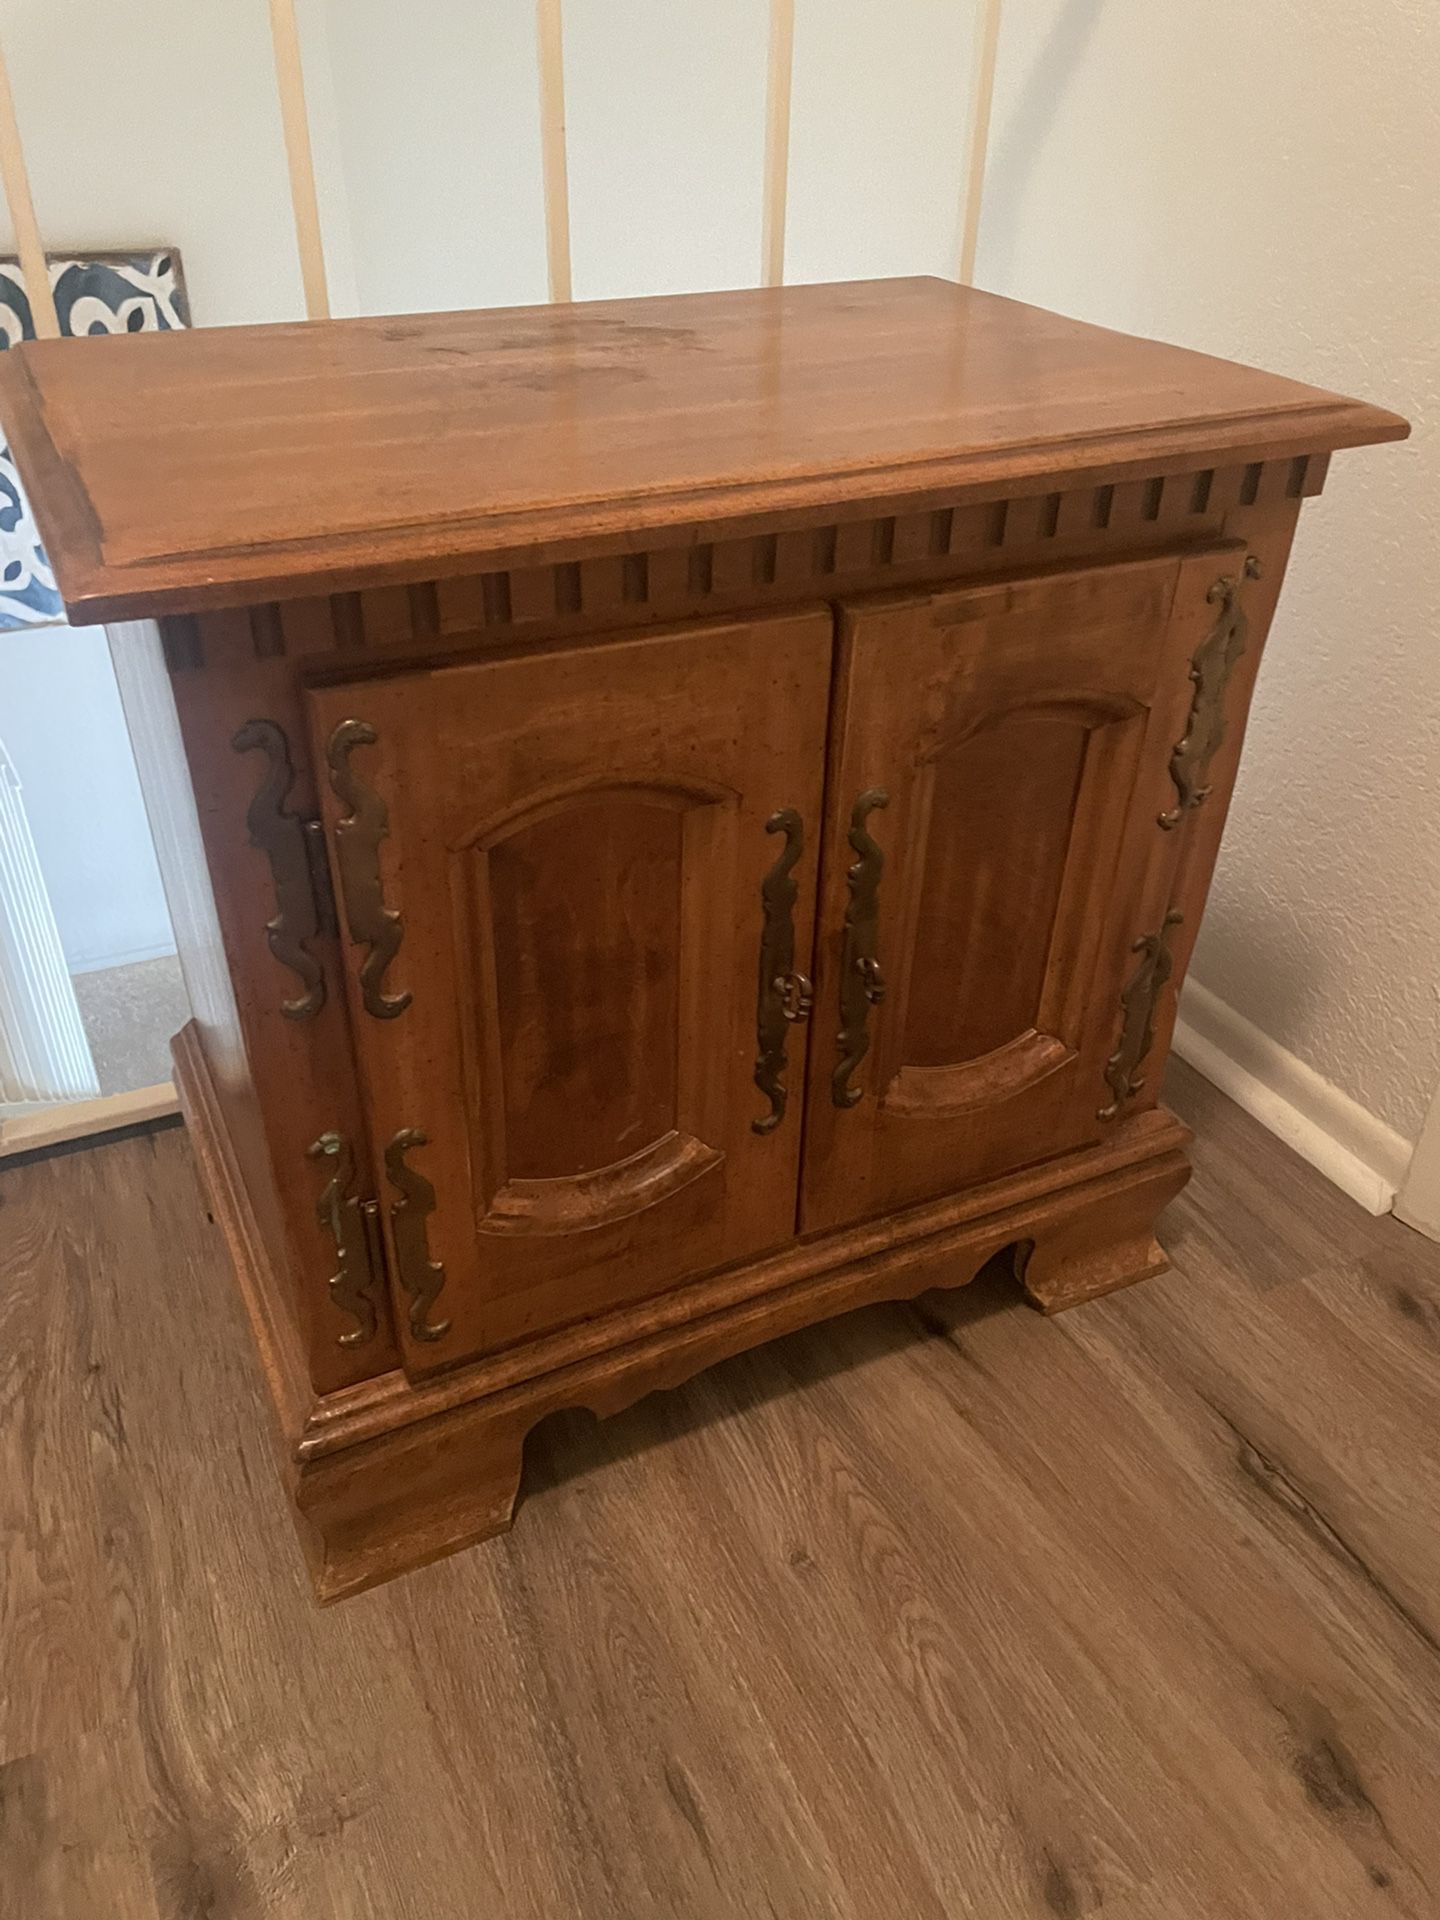 Oak End Table/ Night stand